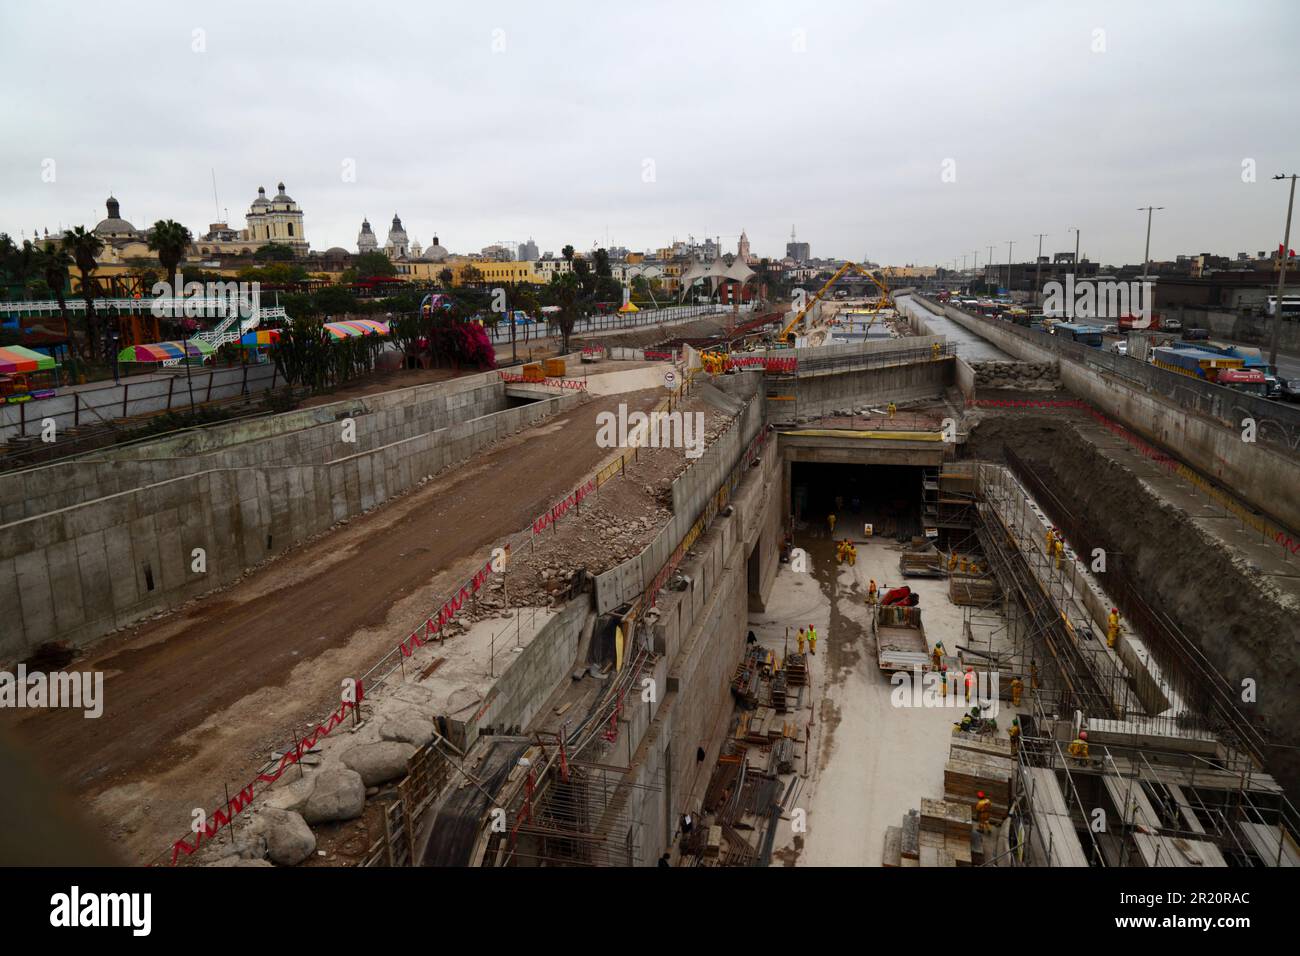 Construction site of tunnel under the River Rimac for a new motorway and Yellow Line Via Expresa bus route, Lima, Peru. The tunnel runs for 1.8km under the River Rimac, which was diverted to allow construction to take place. Works started in January 2012 and took 6 years, the tunnel opened in June 2018. The Brazilian company OAS built the tunnel. The 2 yellow towers in the background are part of San Francisco church in the historic centre. Stock Photo